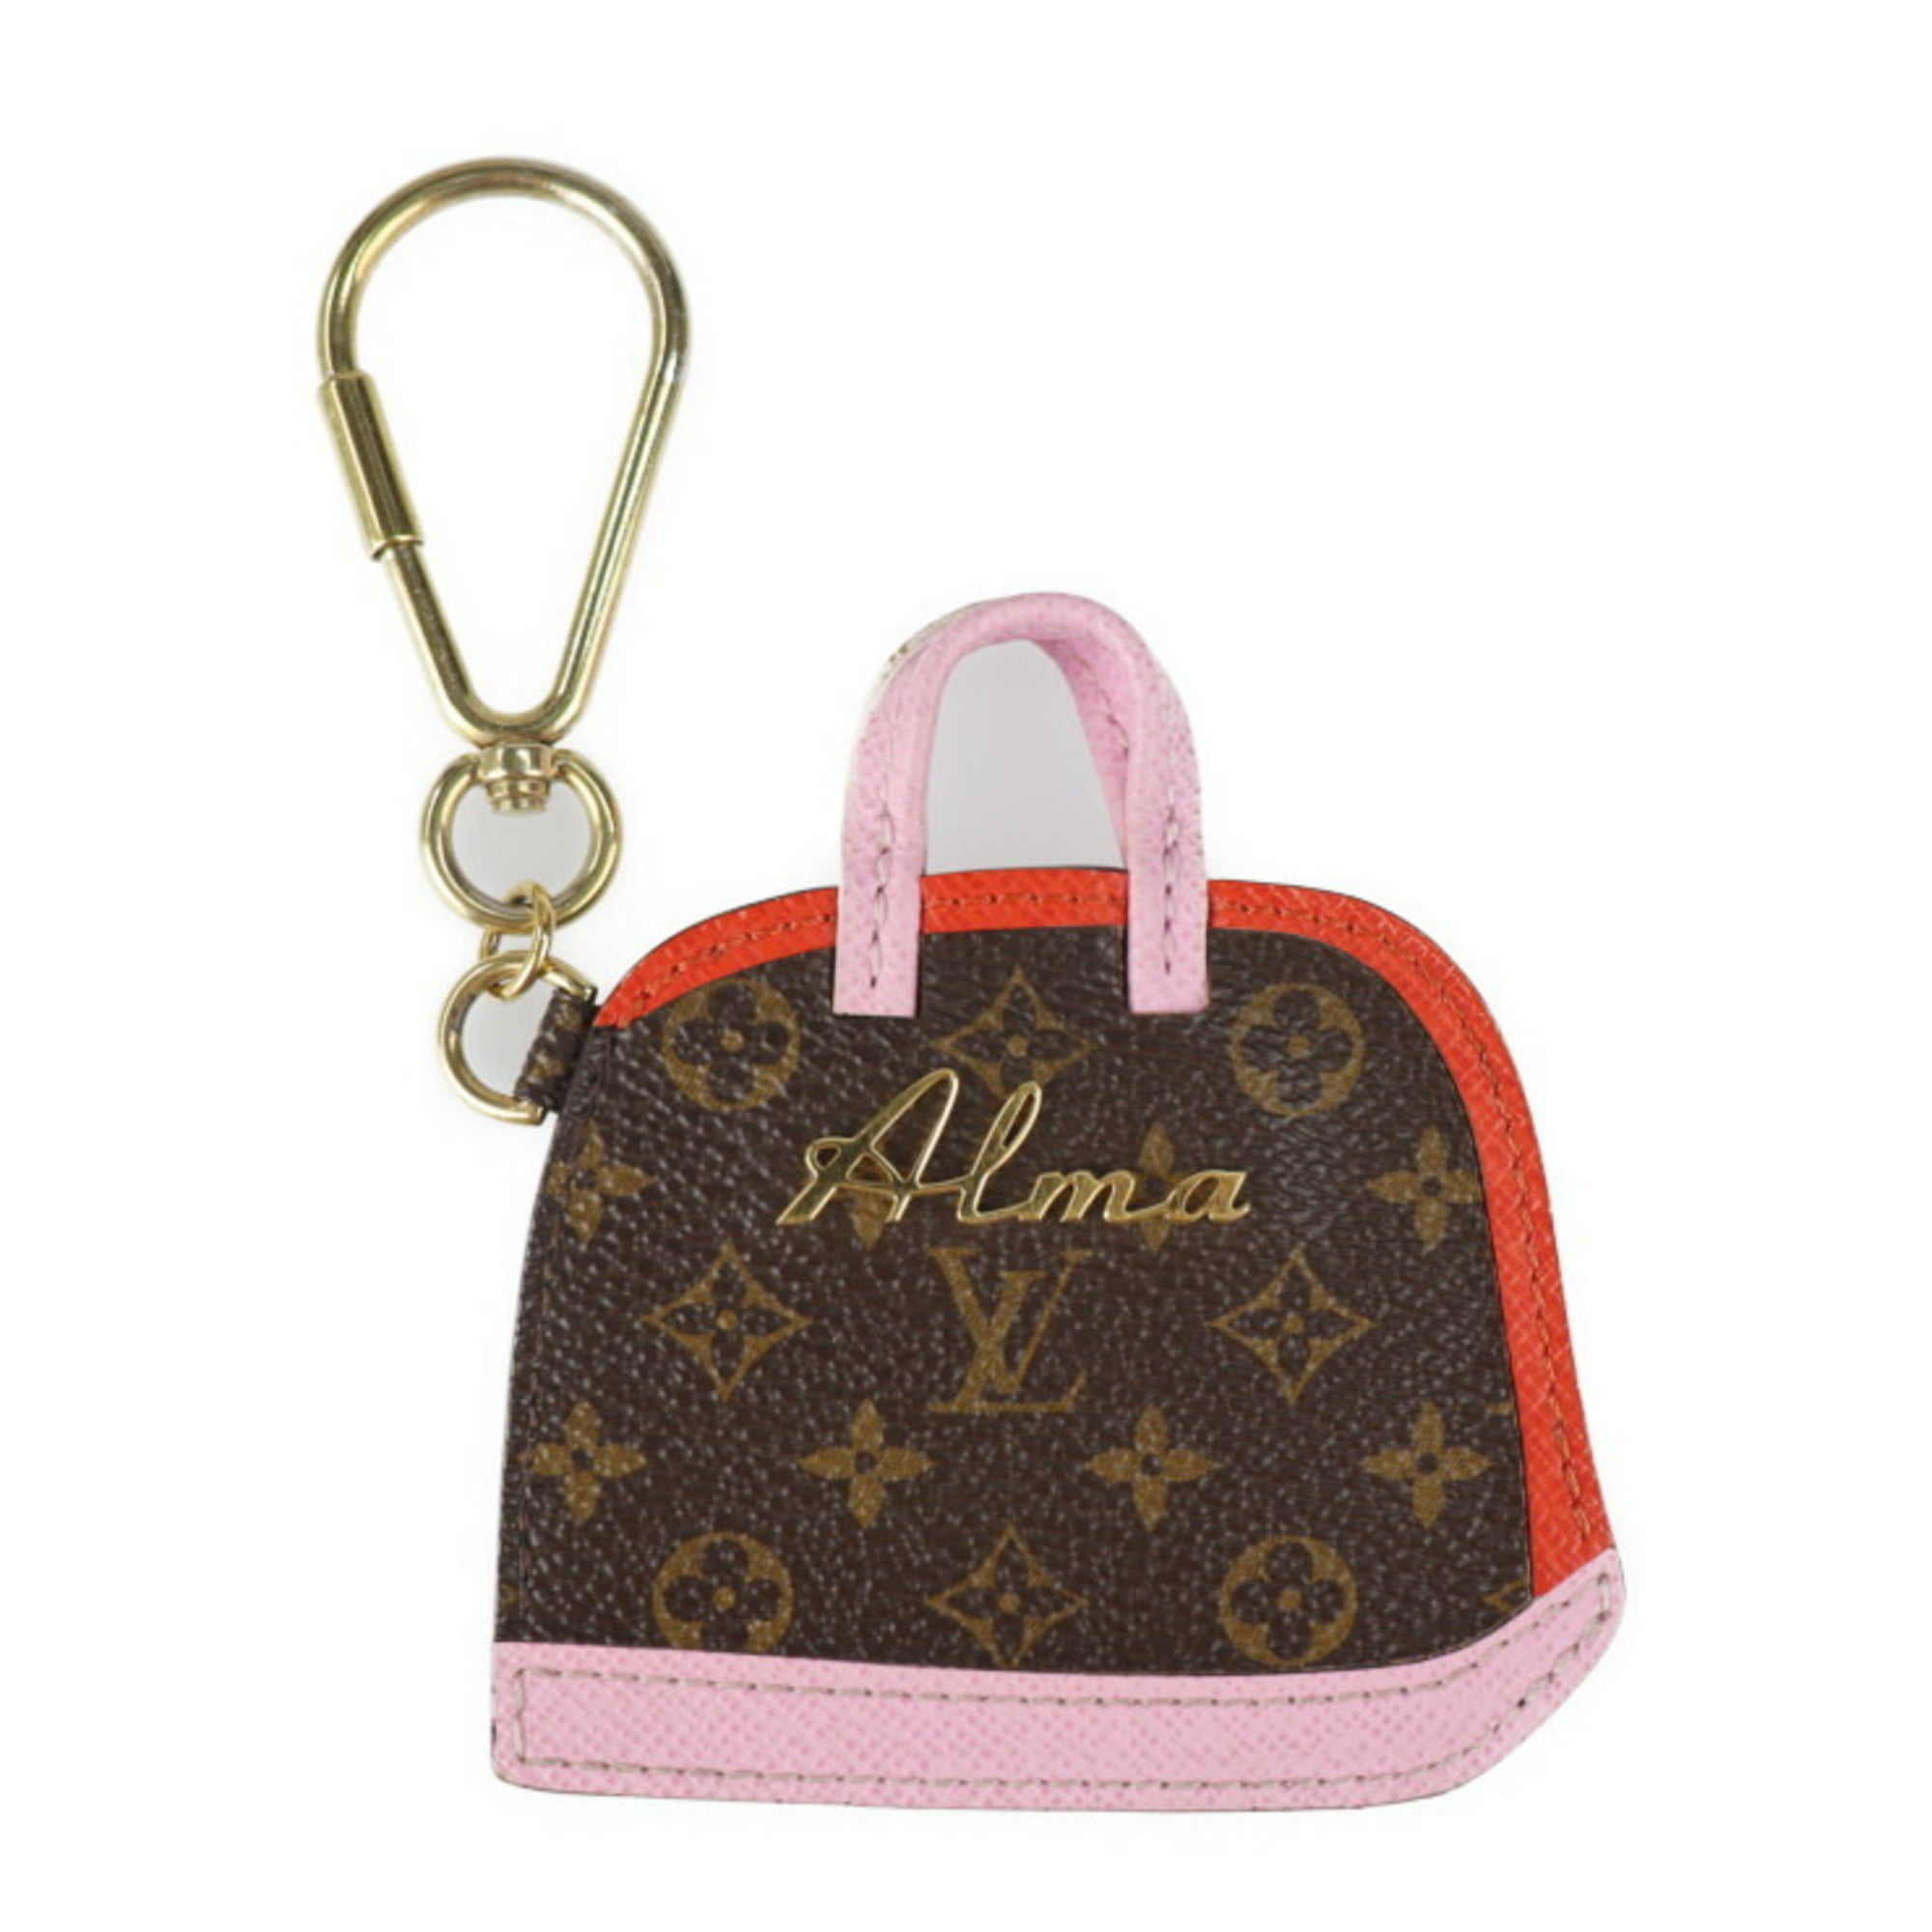 Louis+Vuitton+Alma+BB+Pink+Leather for sale online